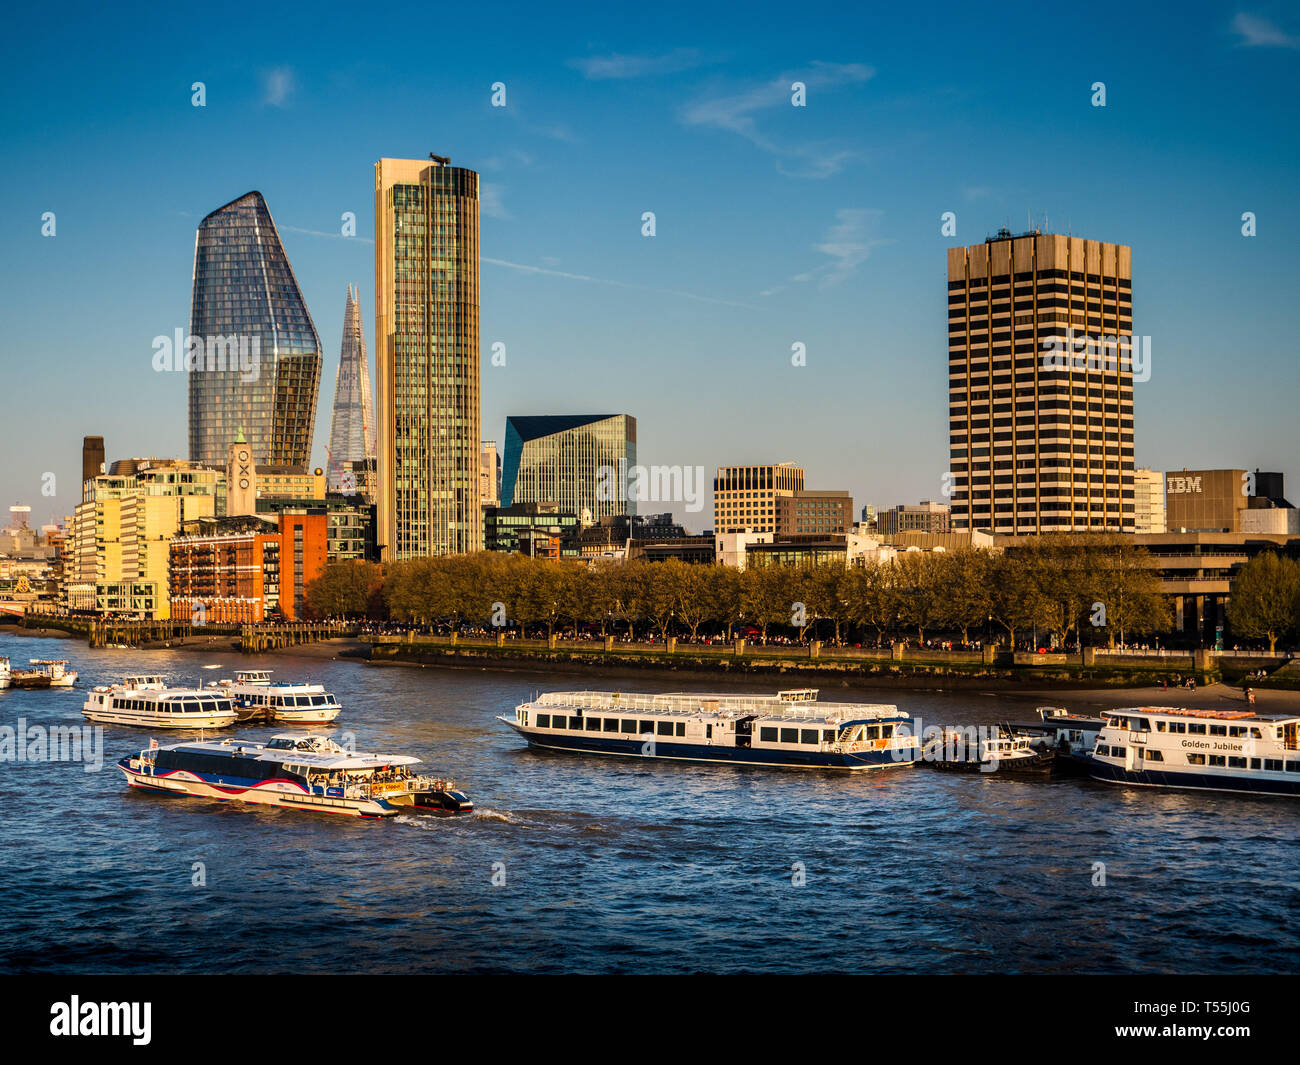 London Southbank Skyline London South Bank including the Oxo Tower, the South Bank Tower, One Blackfriars and the Shard Stock Photo